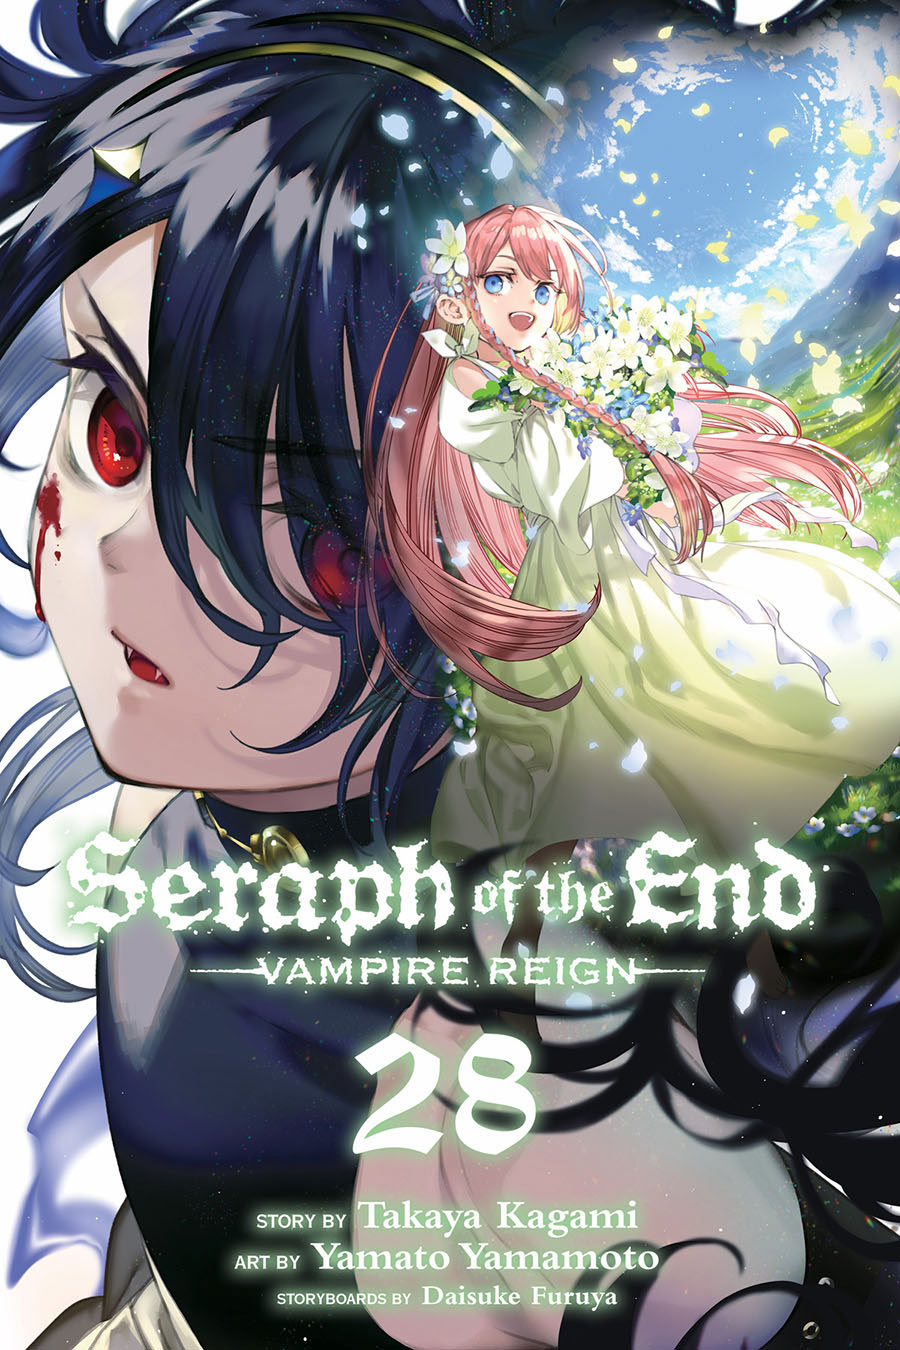 Seraph Of The End Vampire Reign Vol 28 TP